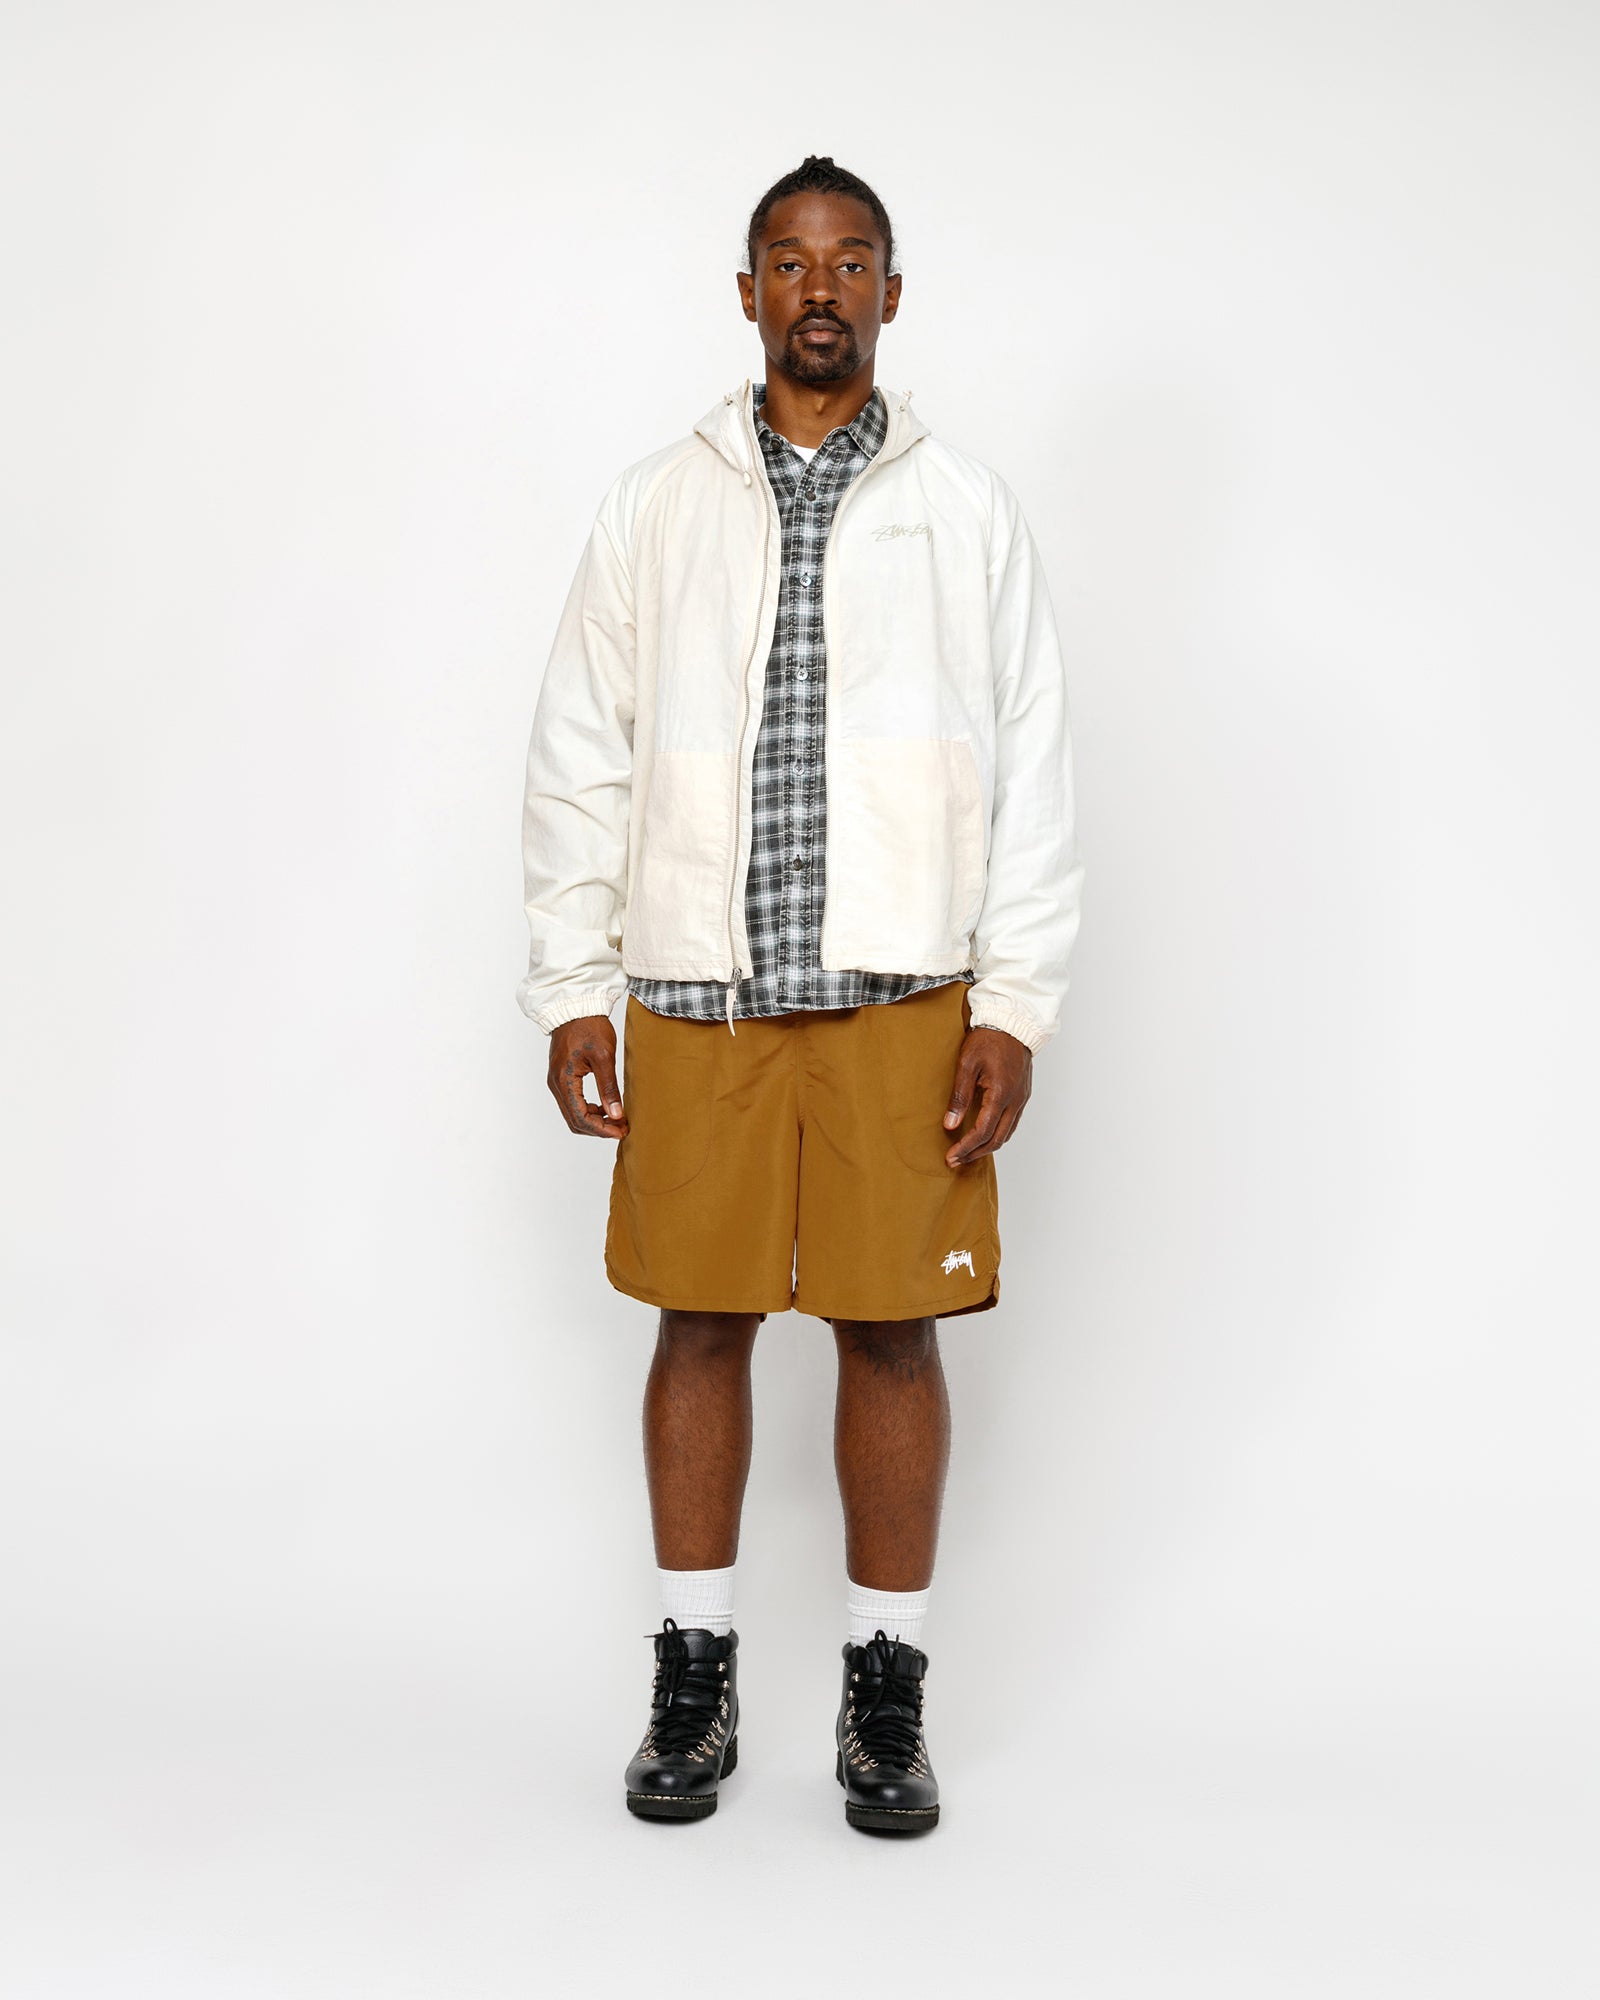 Stüssy Water Short Stock Coyote Shorts